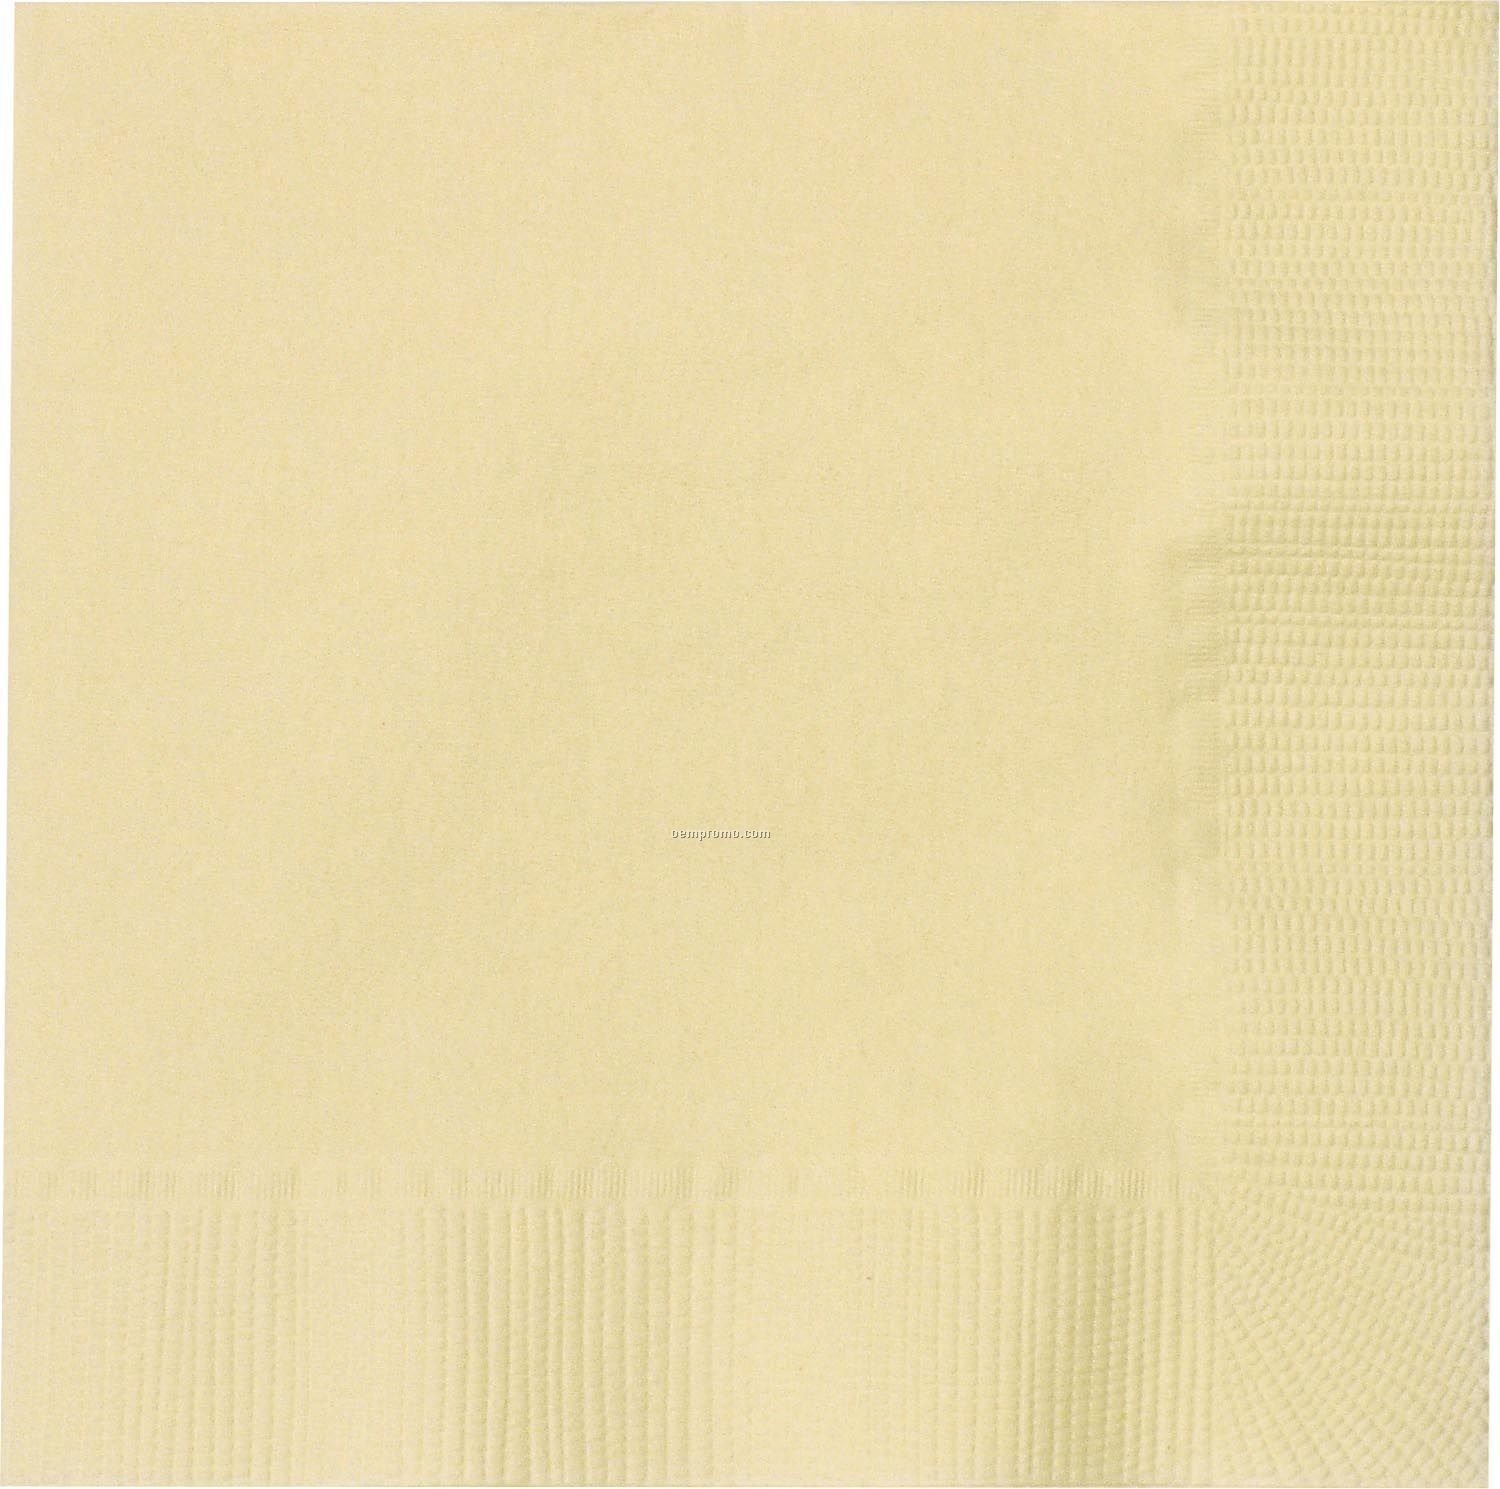 Colorware Ivory White Dinner Napkins With 1/4 Fold